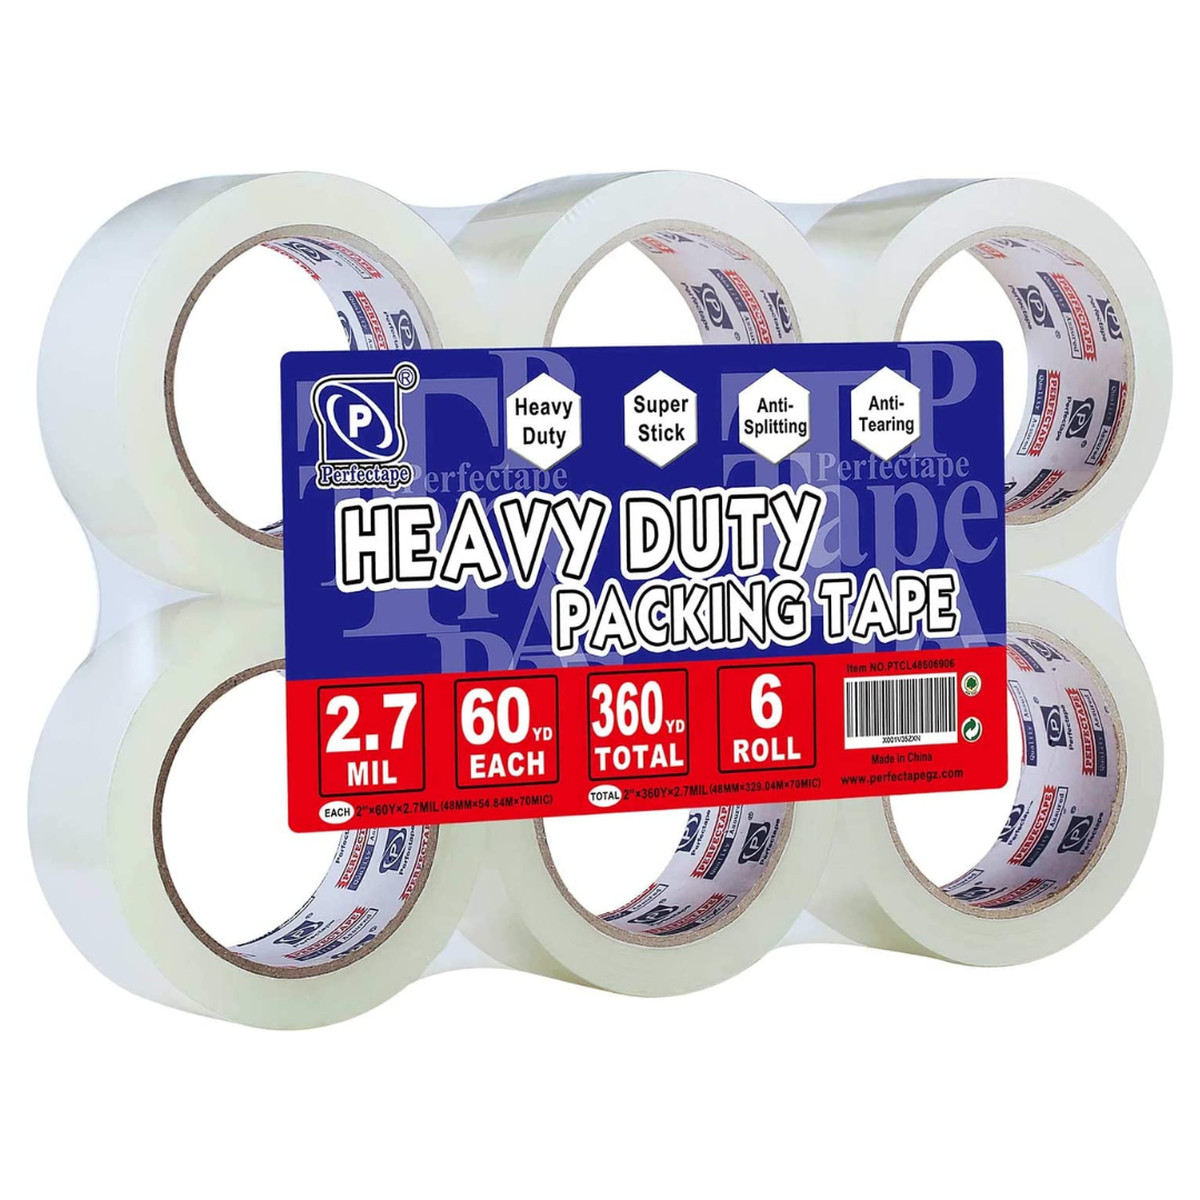 P PERFECTAPE Packing Tape 